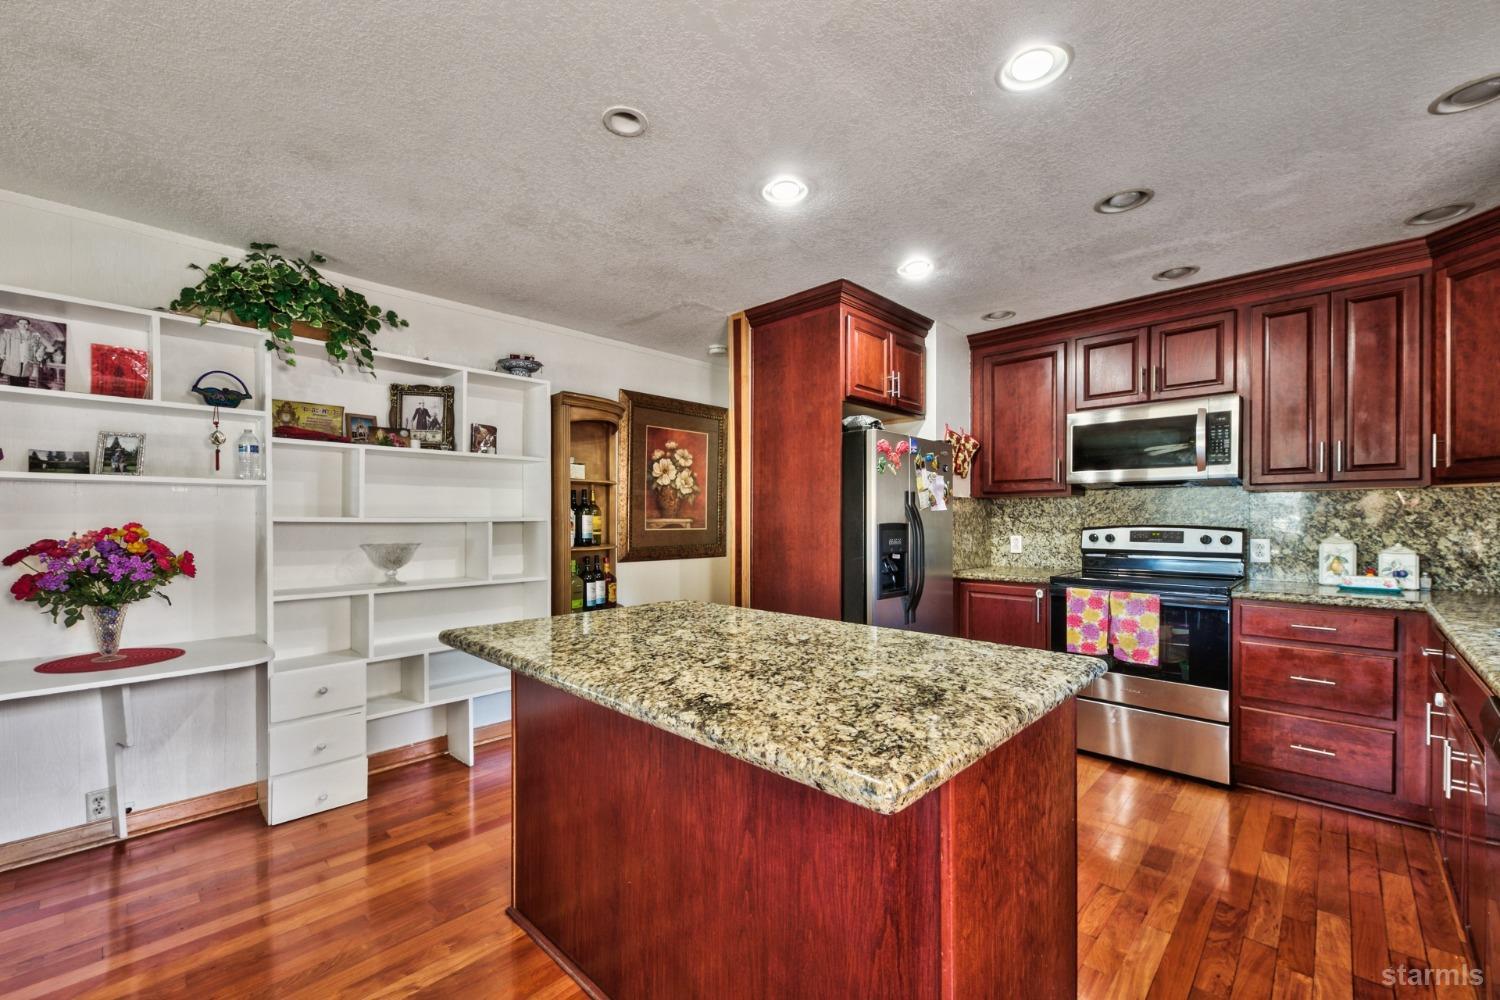 a kitchen with granite countertop cabinets and wooden floor